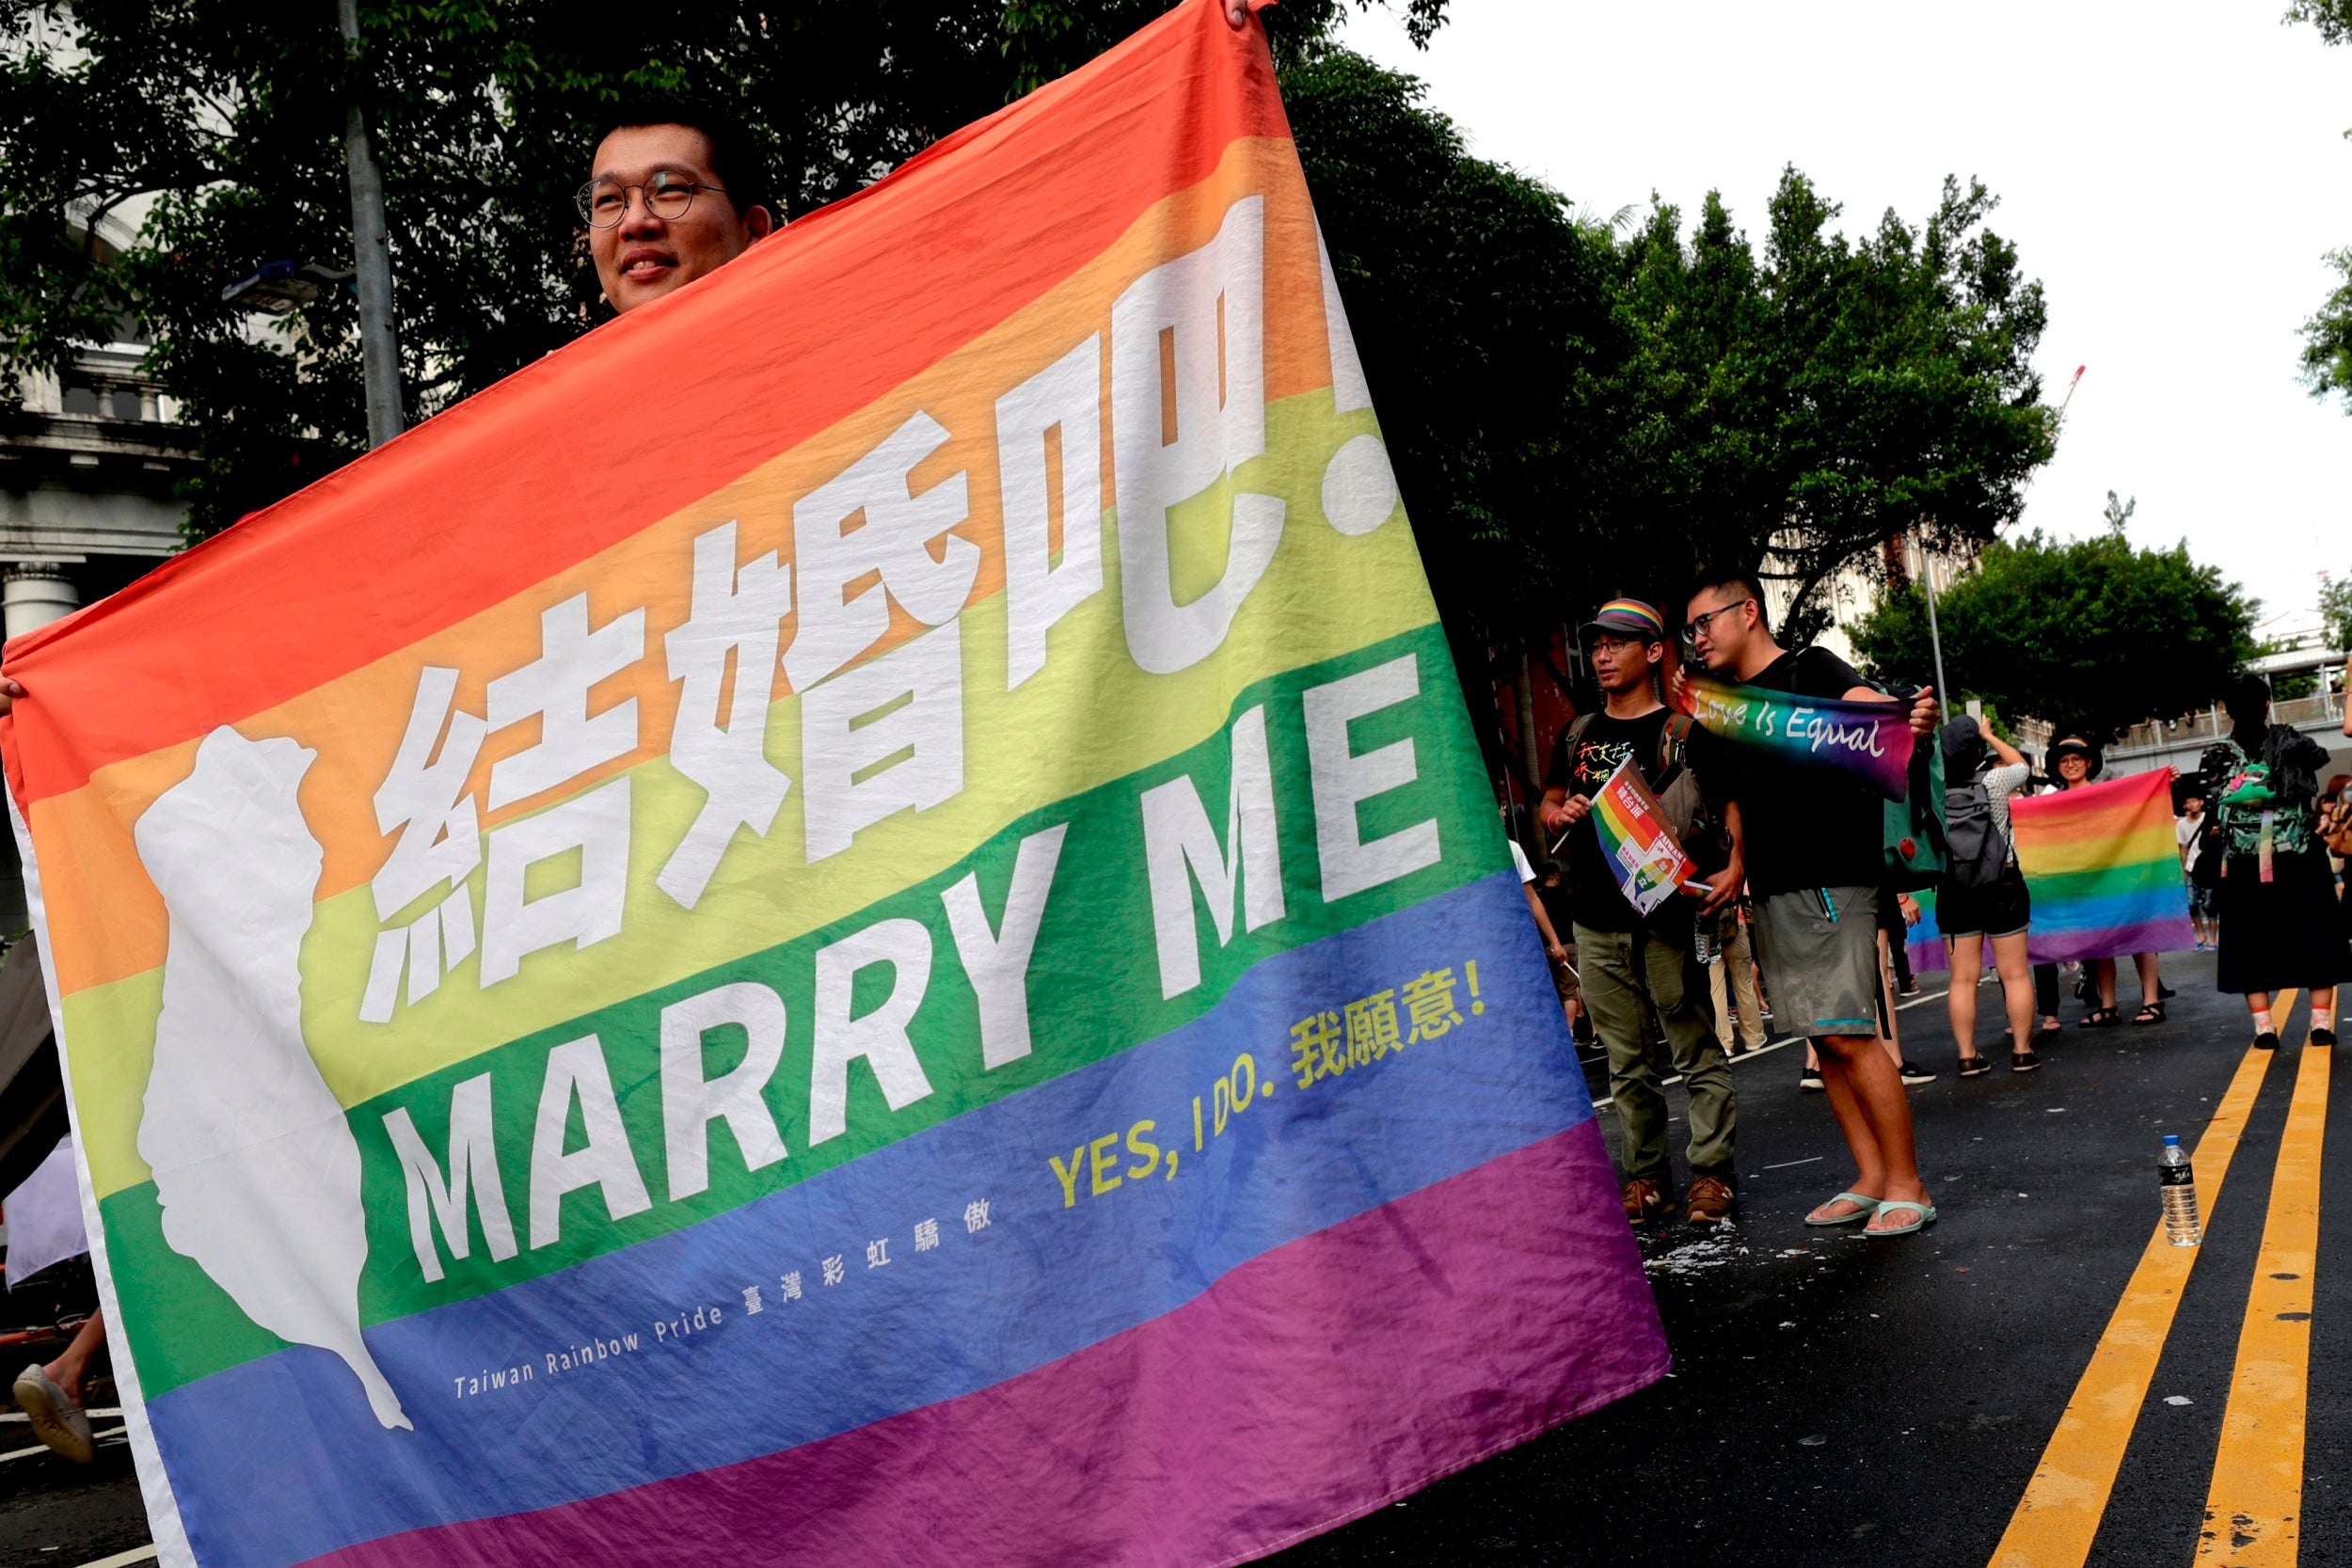 The same-sex marriage bill will come into effect on 24 May